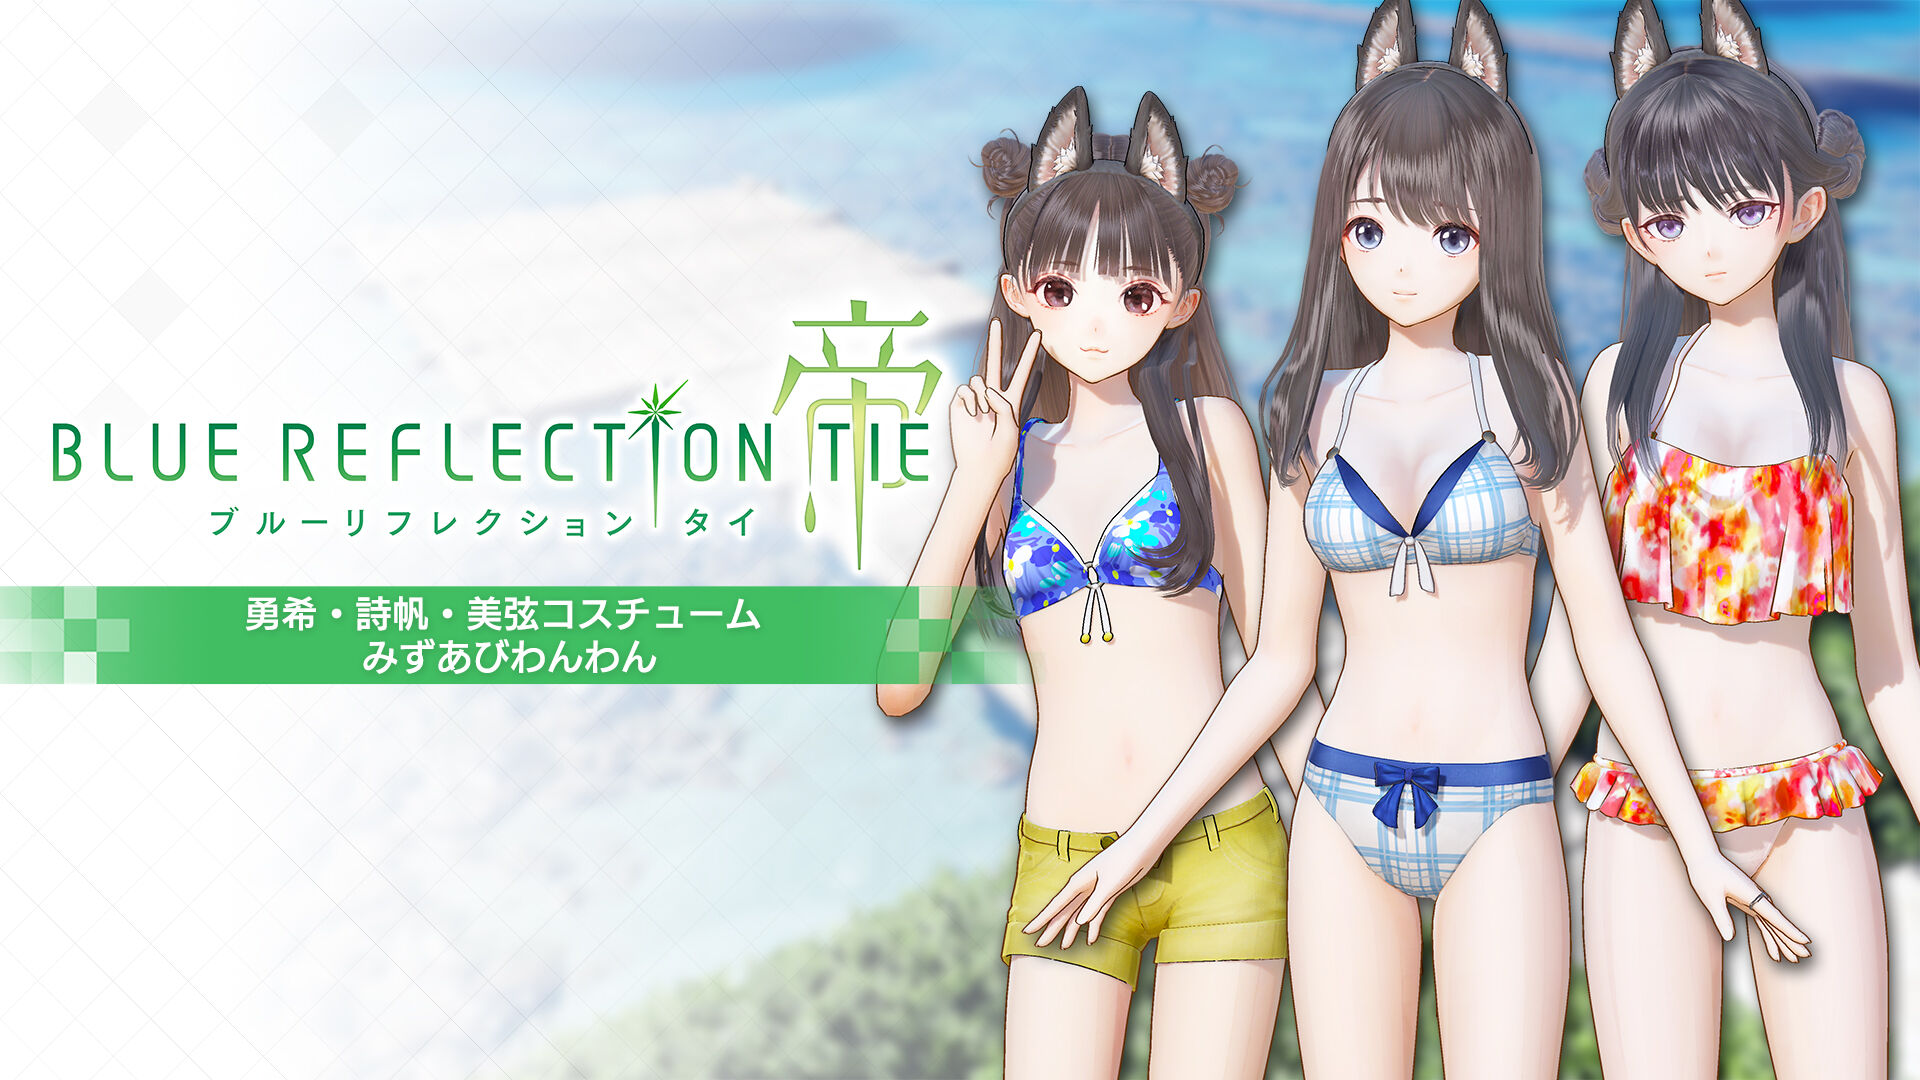 BLUE REFLECTION TIE/帝 Digital Deluxe with Season Pass 